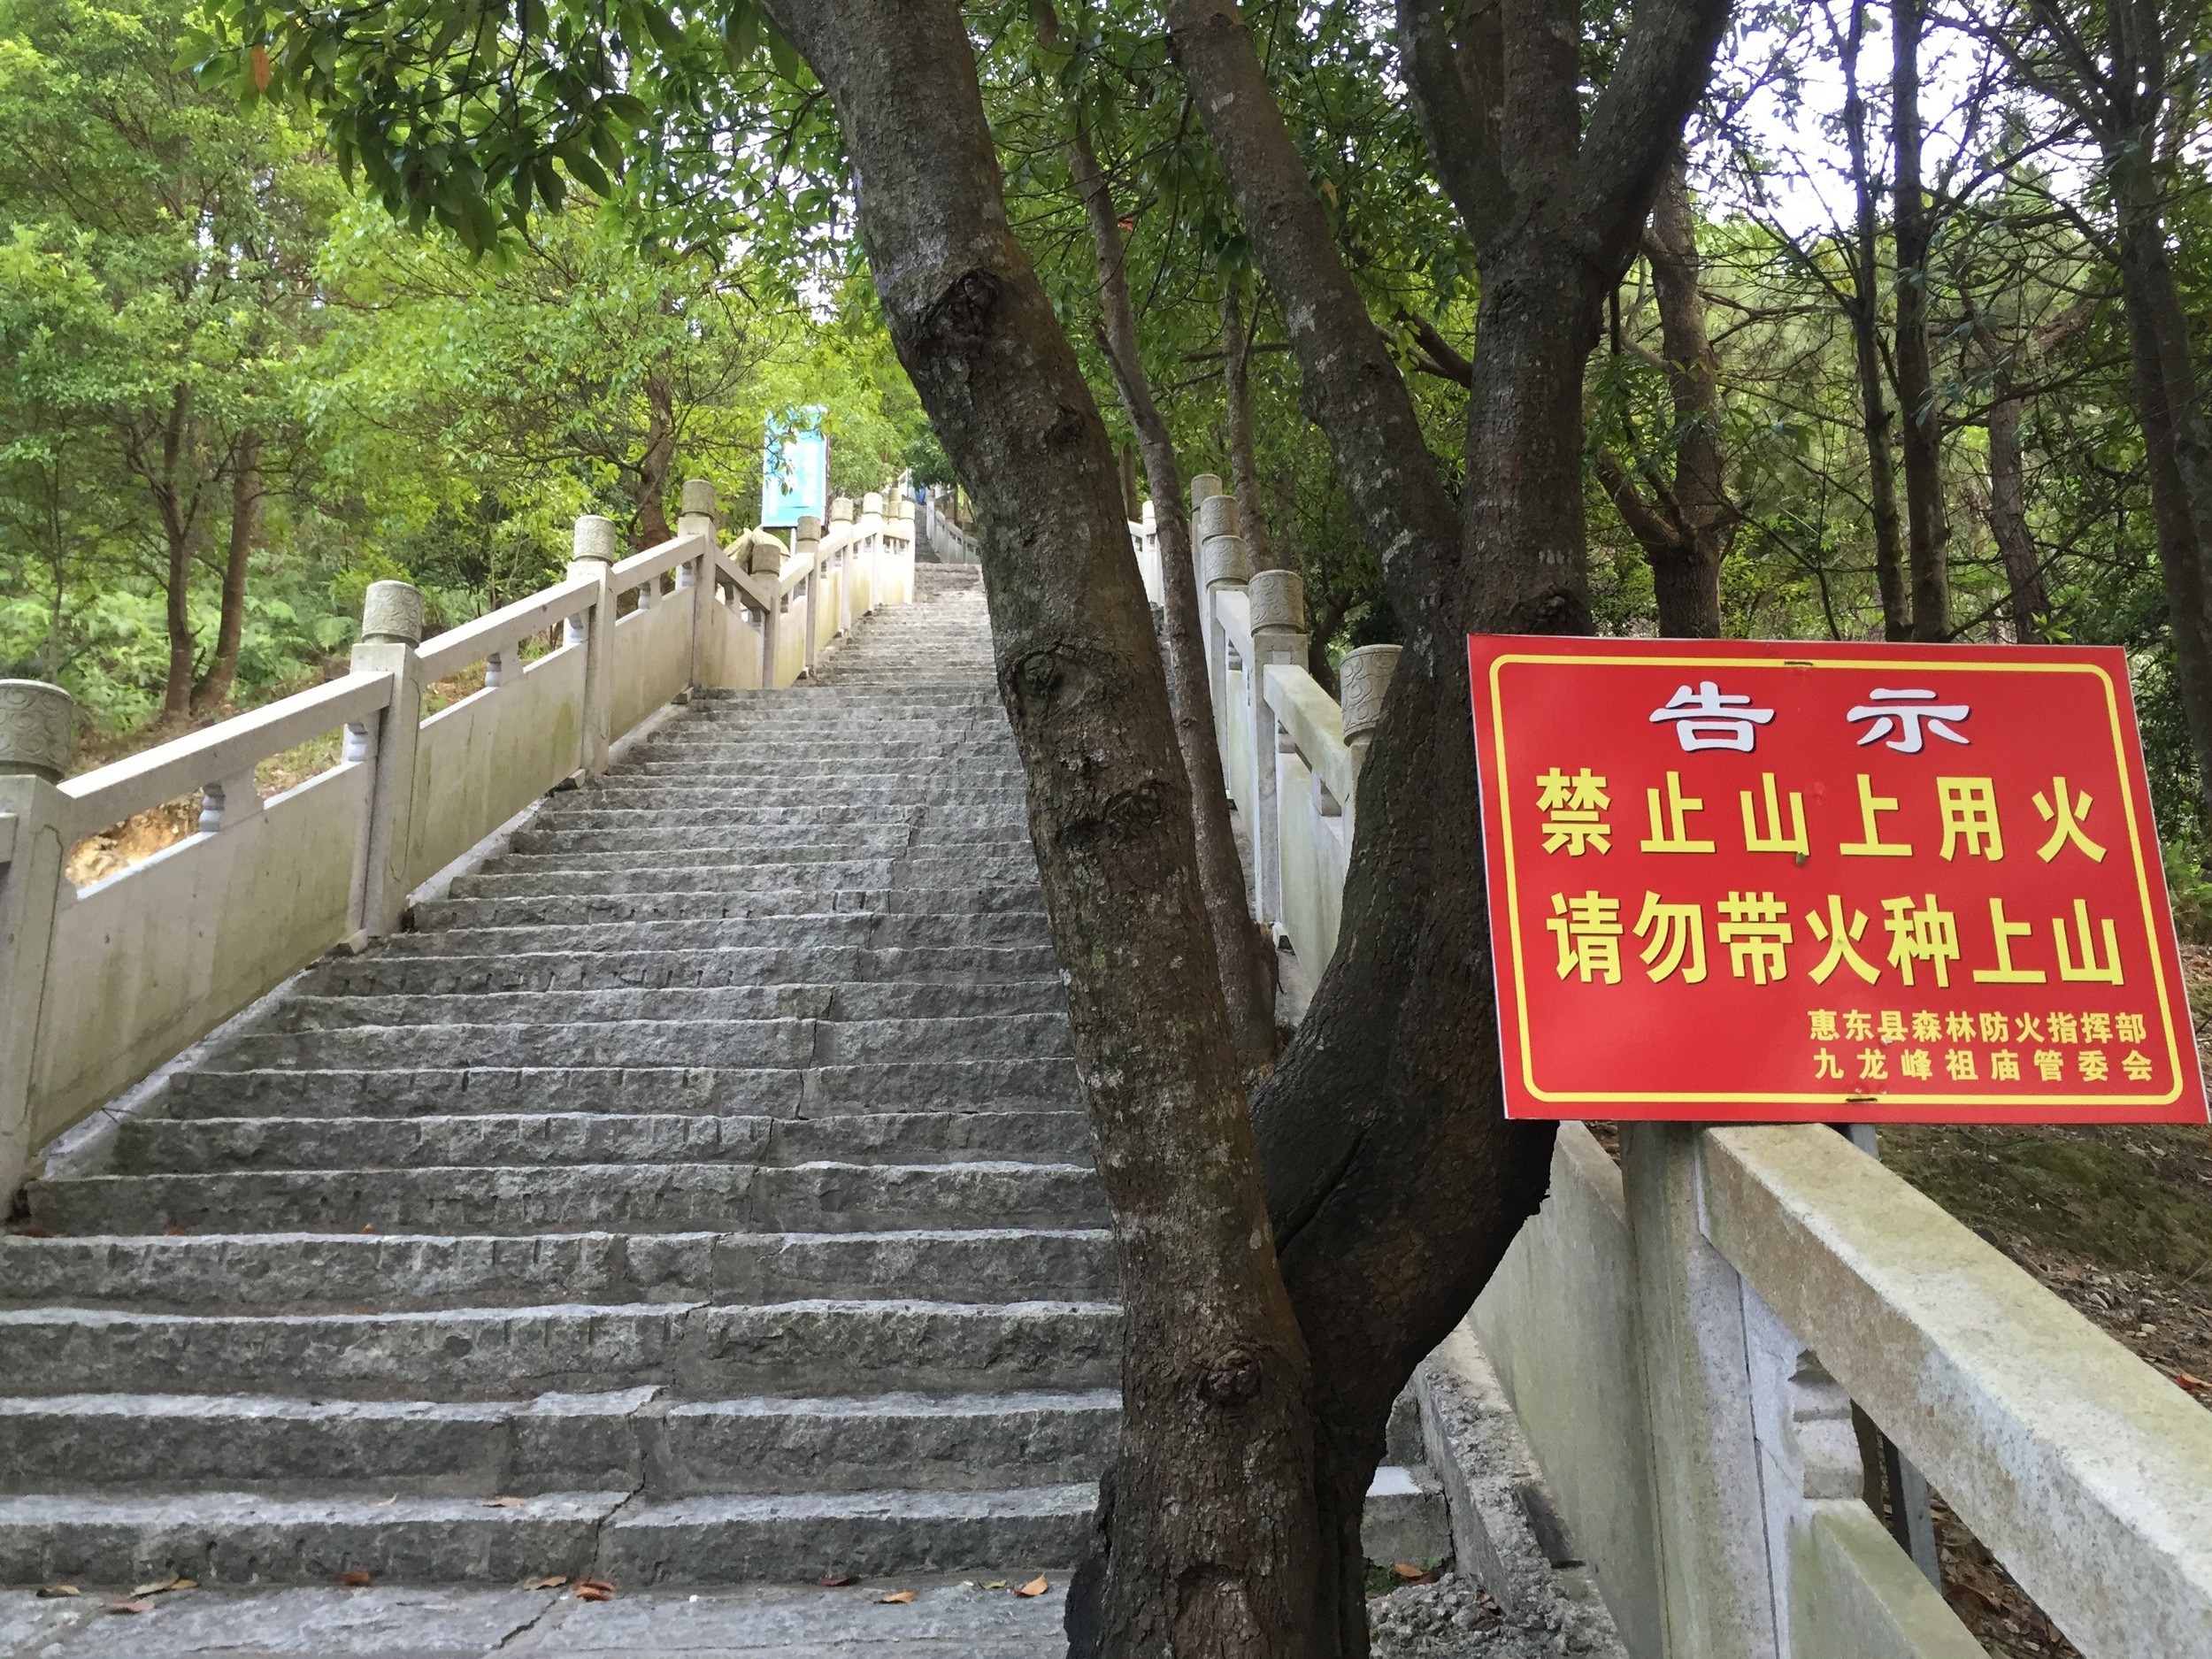  This sign reads 3800 steps to the top, so I was told. &nbsp; 